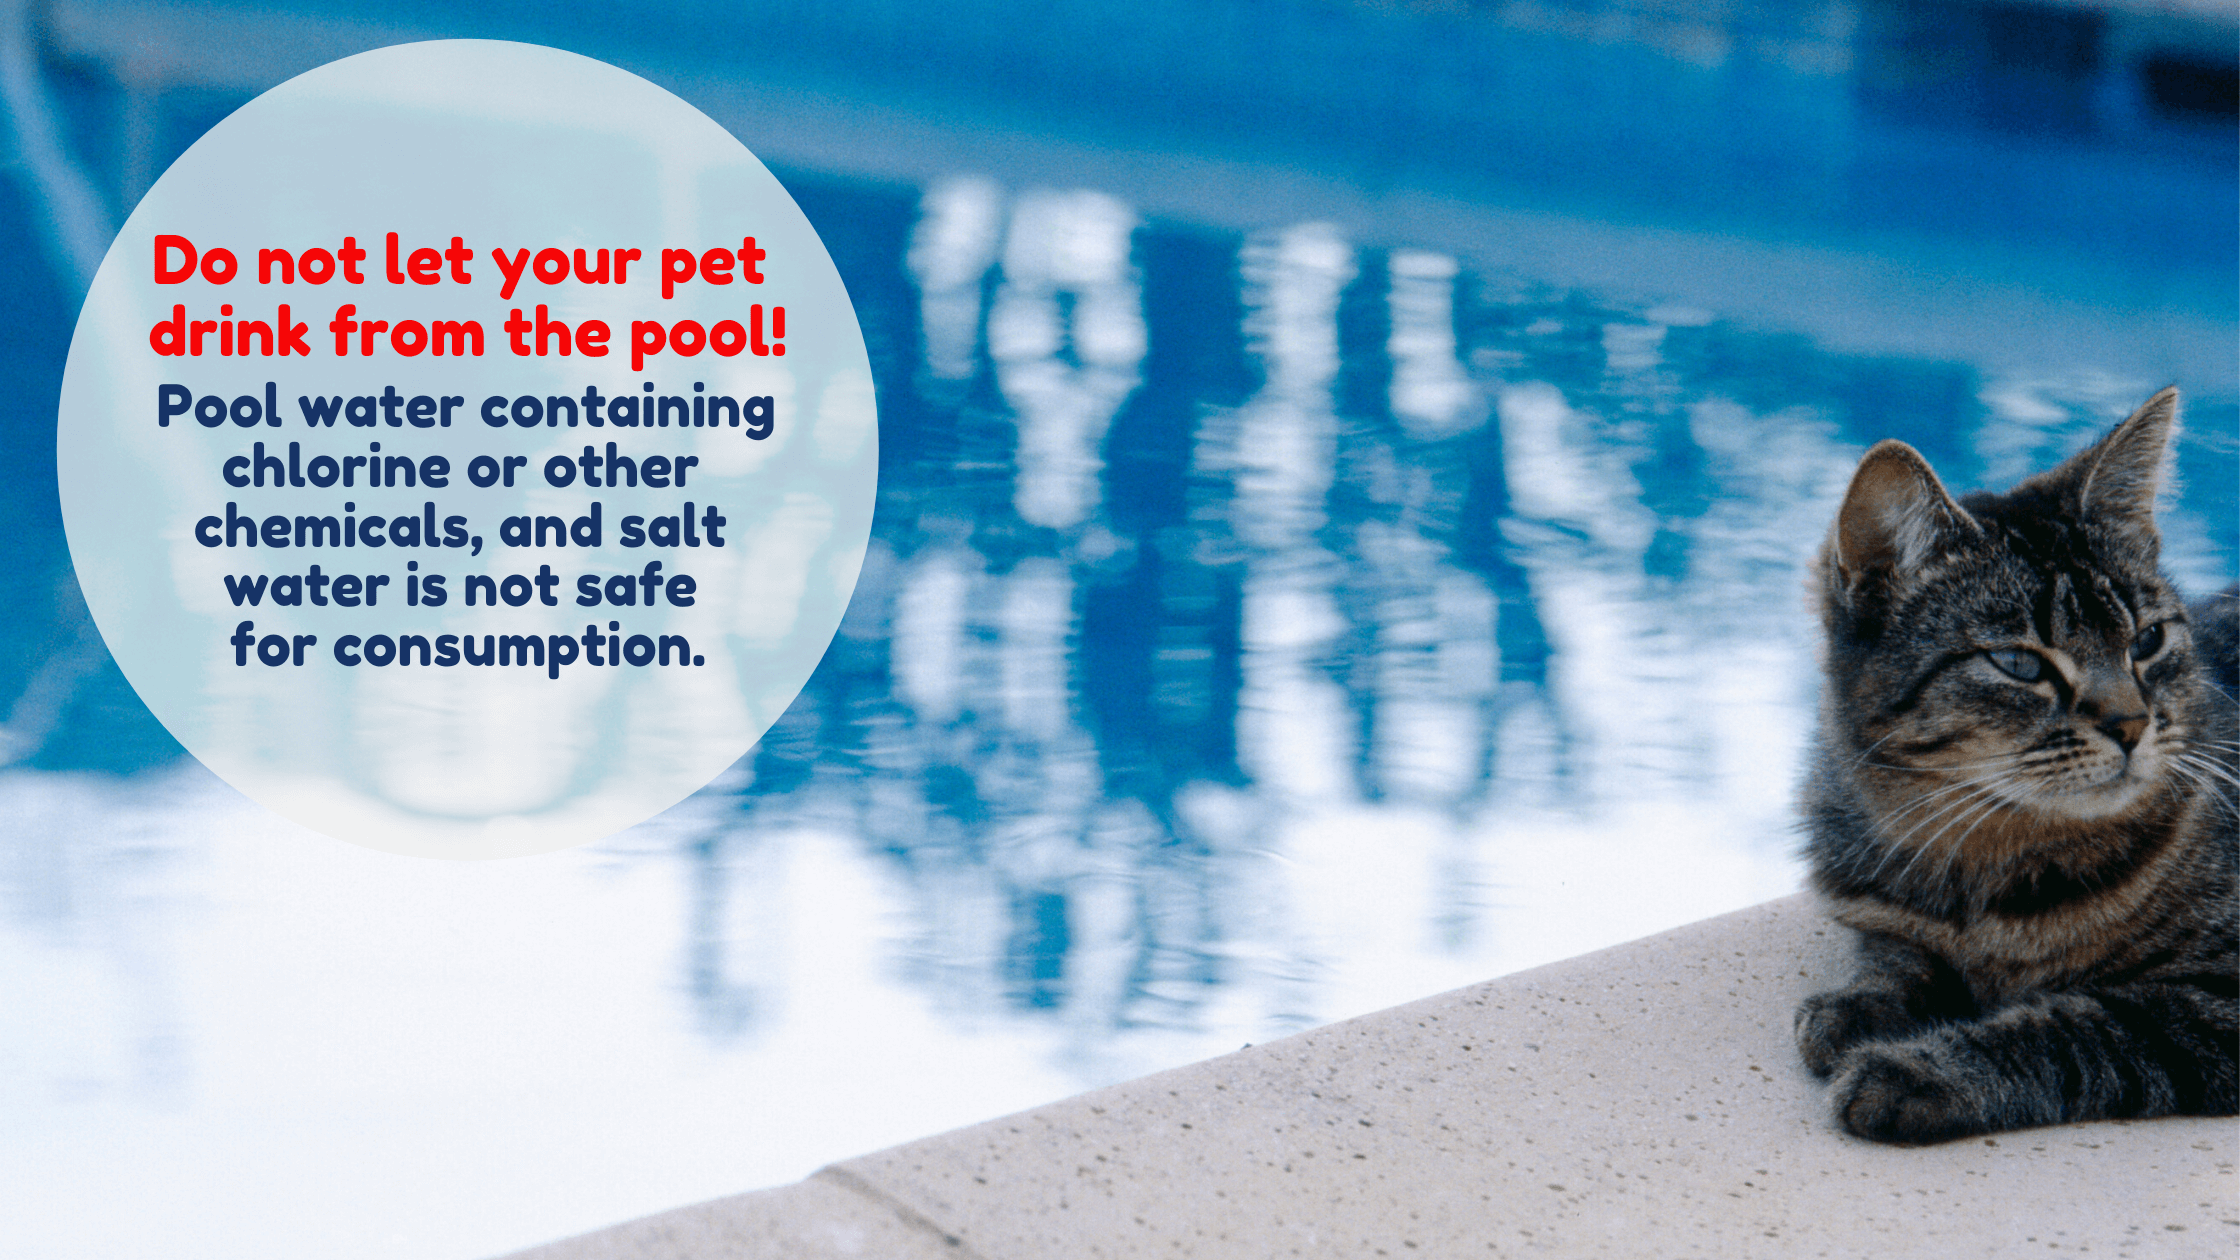 Water Safety; Pool water toxic for pets